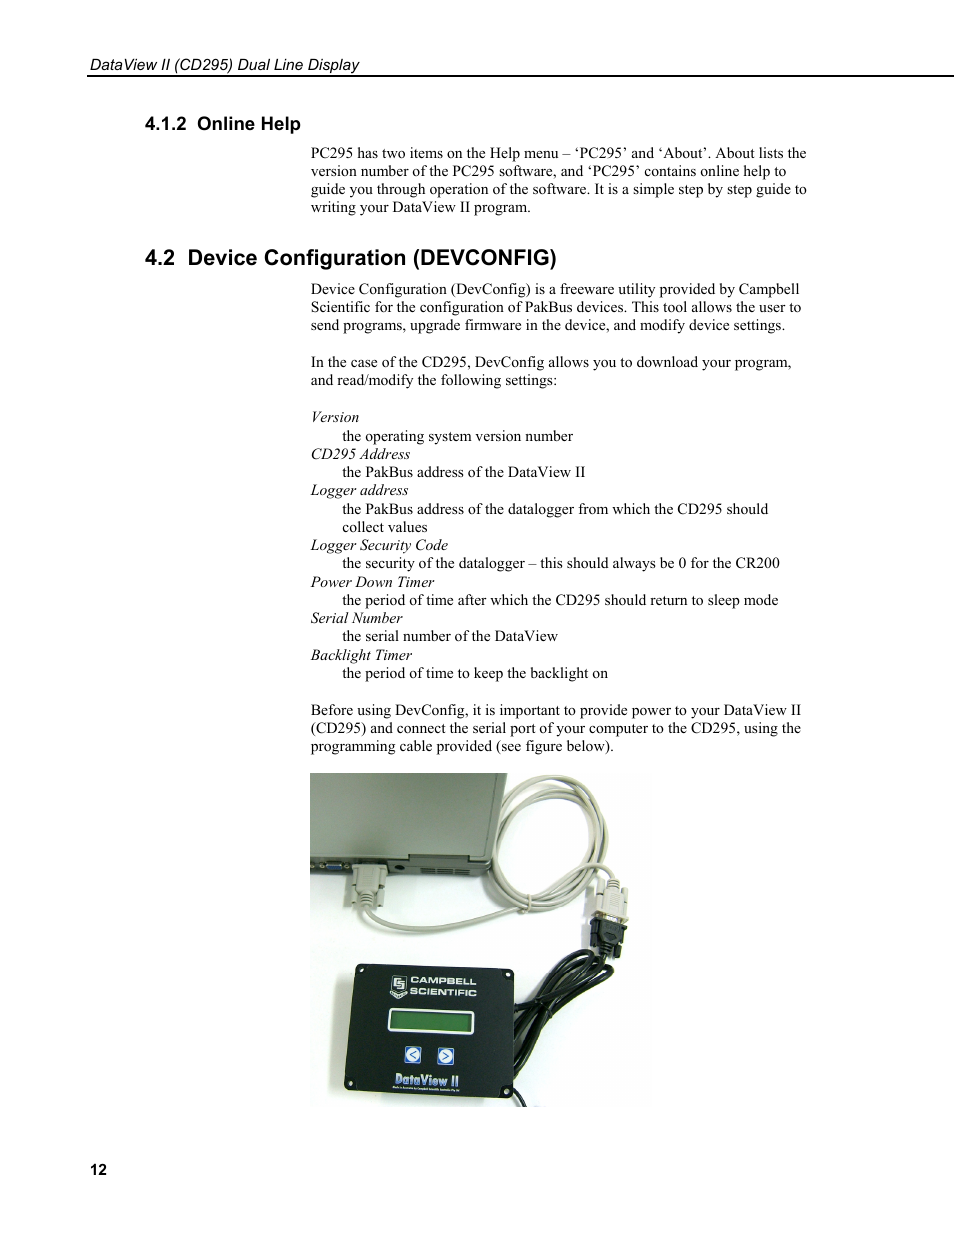 2 online help, 2 device configuration (devconfig) | Campbell Scientific CD295 DataView II Dual Line Display User Manual | Page 16 / 36